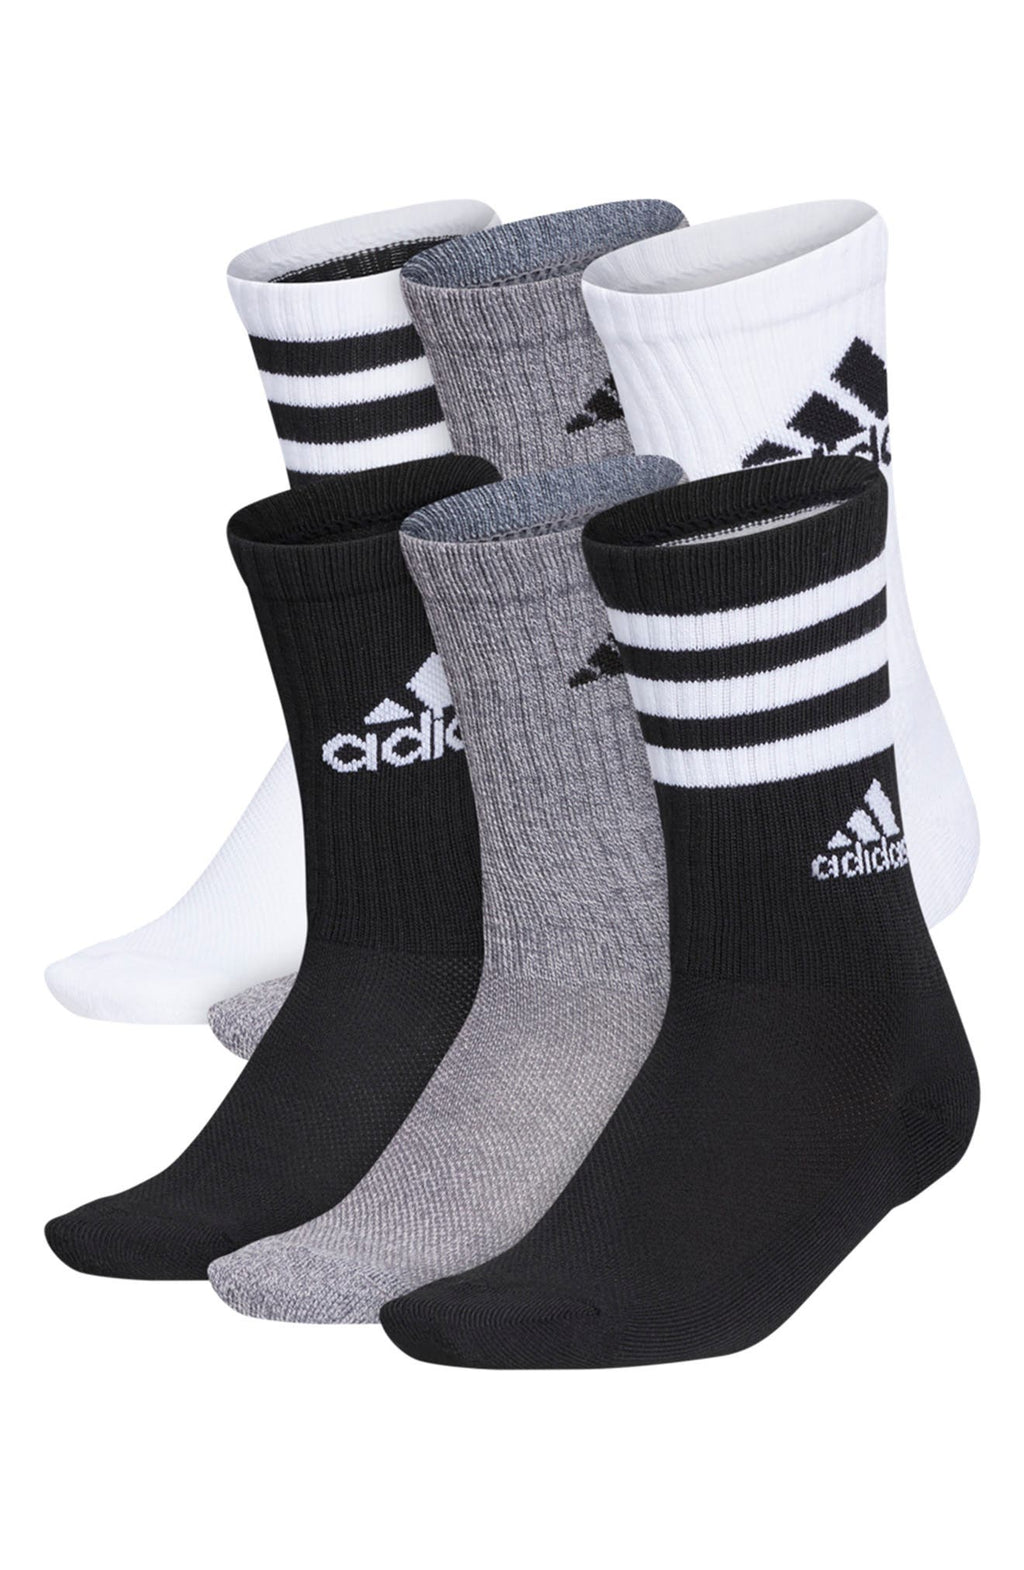 ADIDAS Cushioned Crew Socks - Pack of 6, Main, color, WHITE